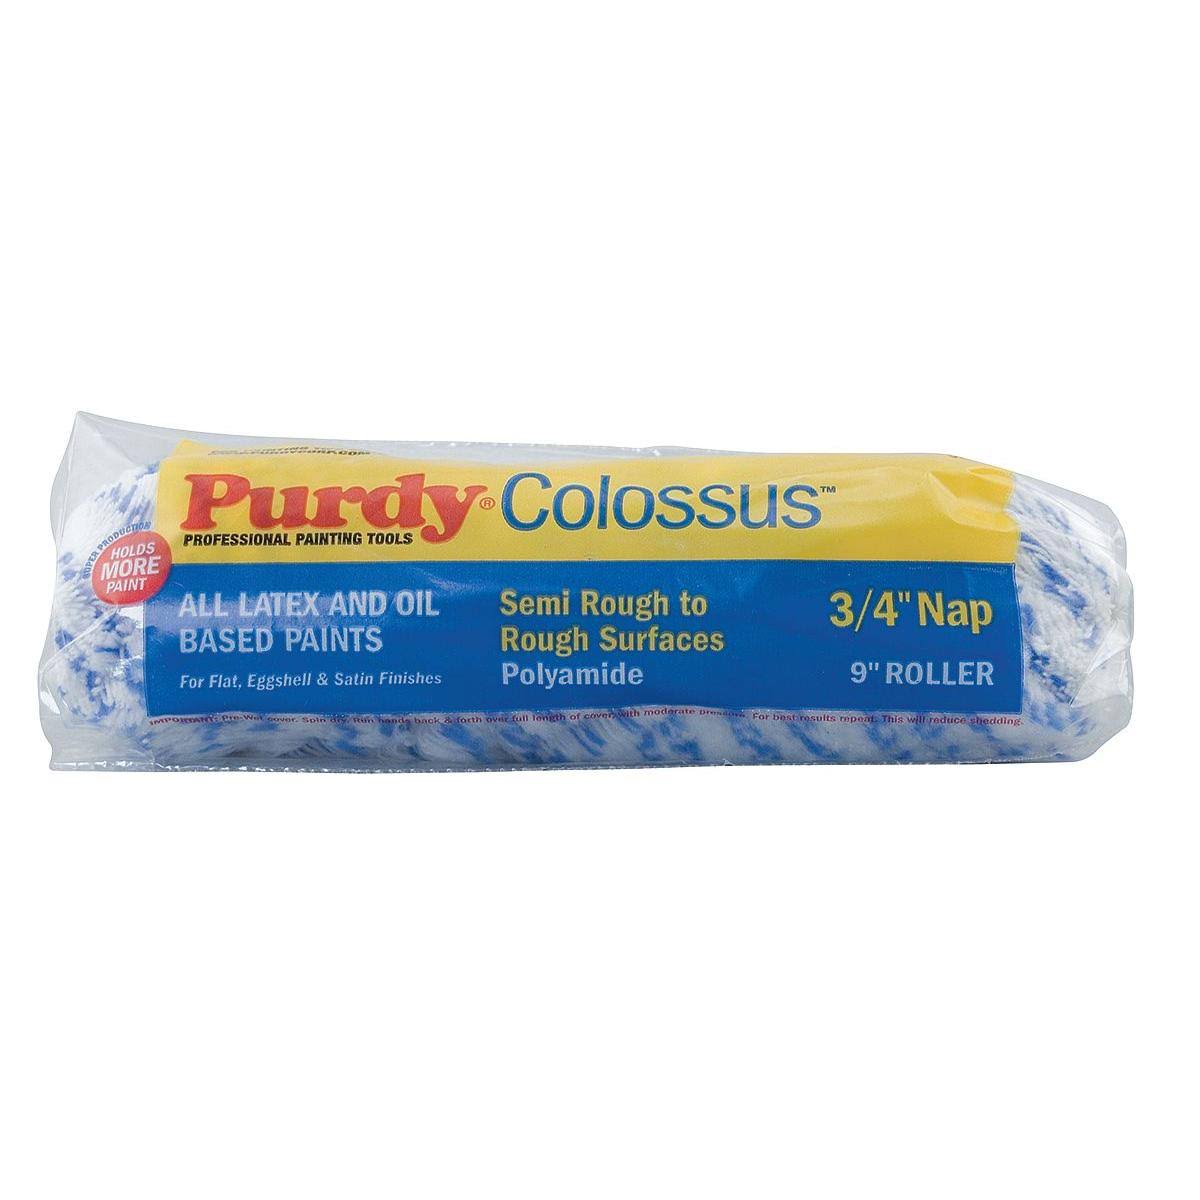 Purdy Colossus Roller Cover - Polyamide, Semi Rough Surfaces, 3/4", Nap 9"